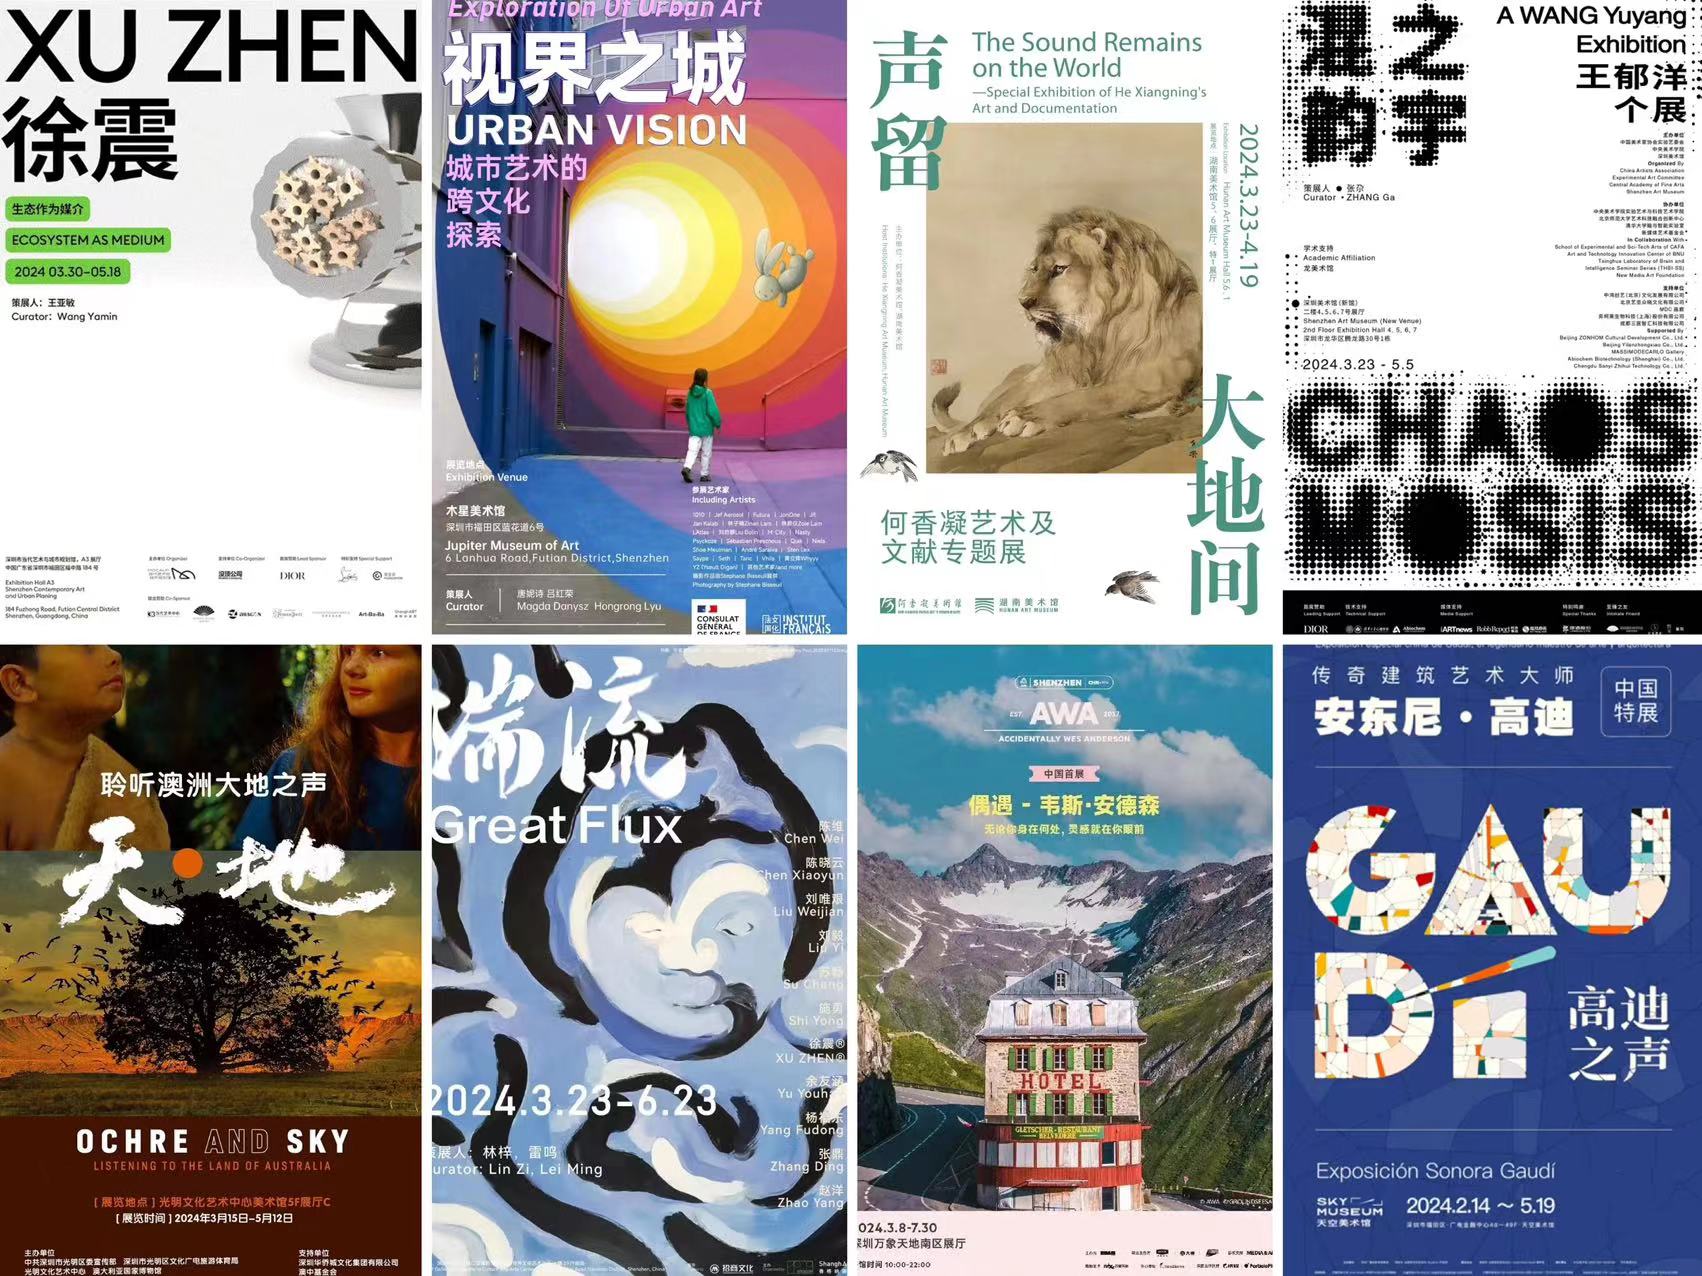 25 Amazing Art Shows This April in Shenzhen